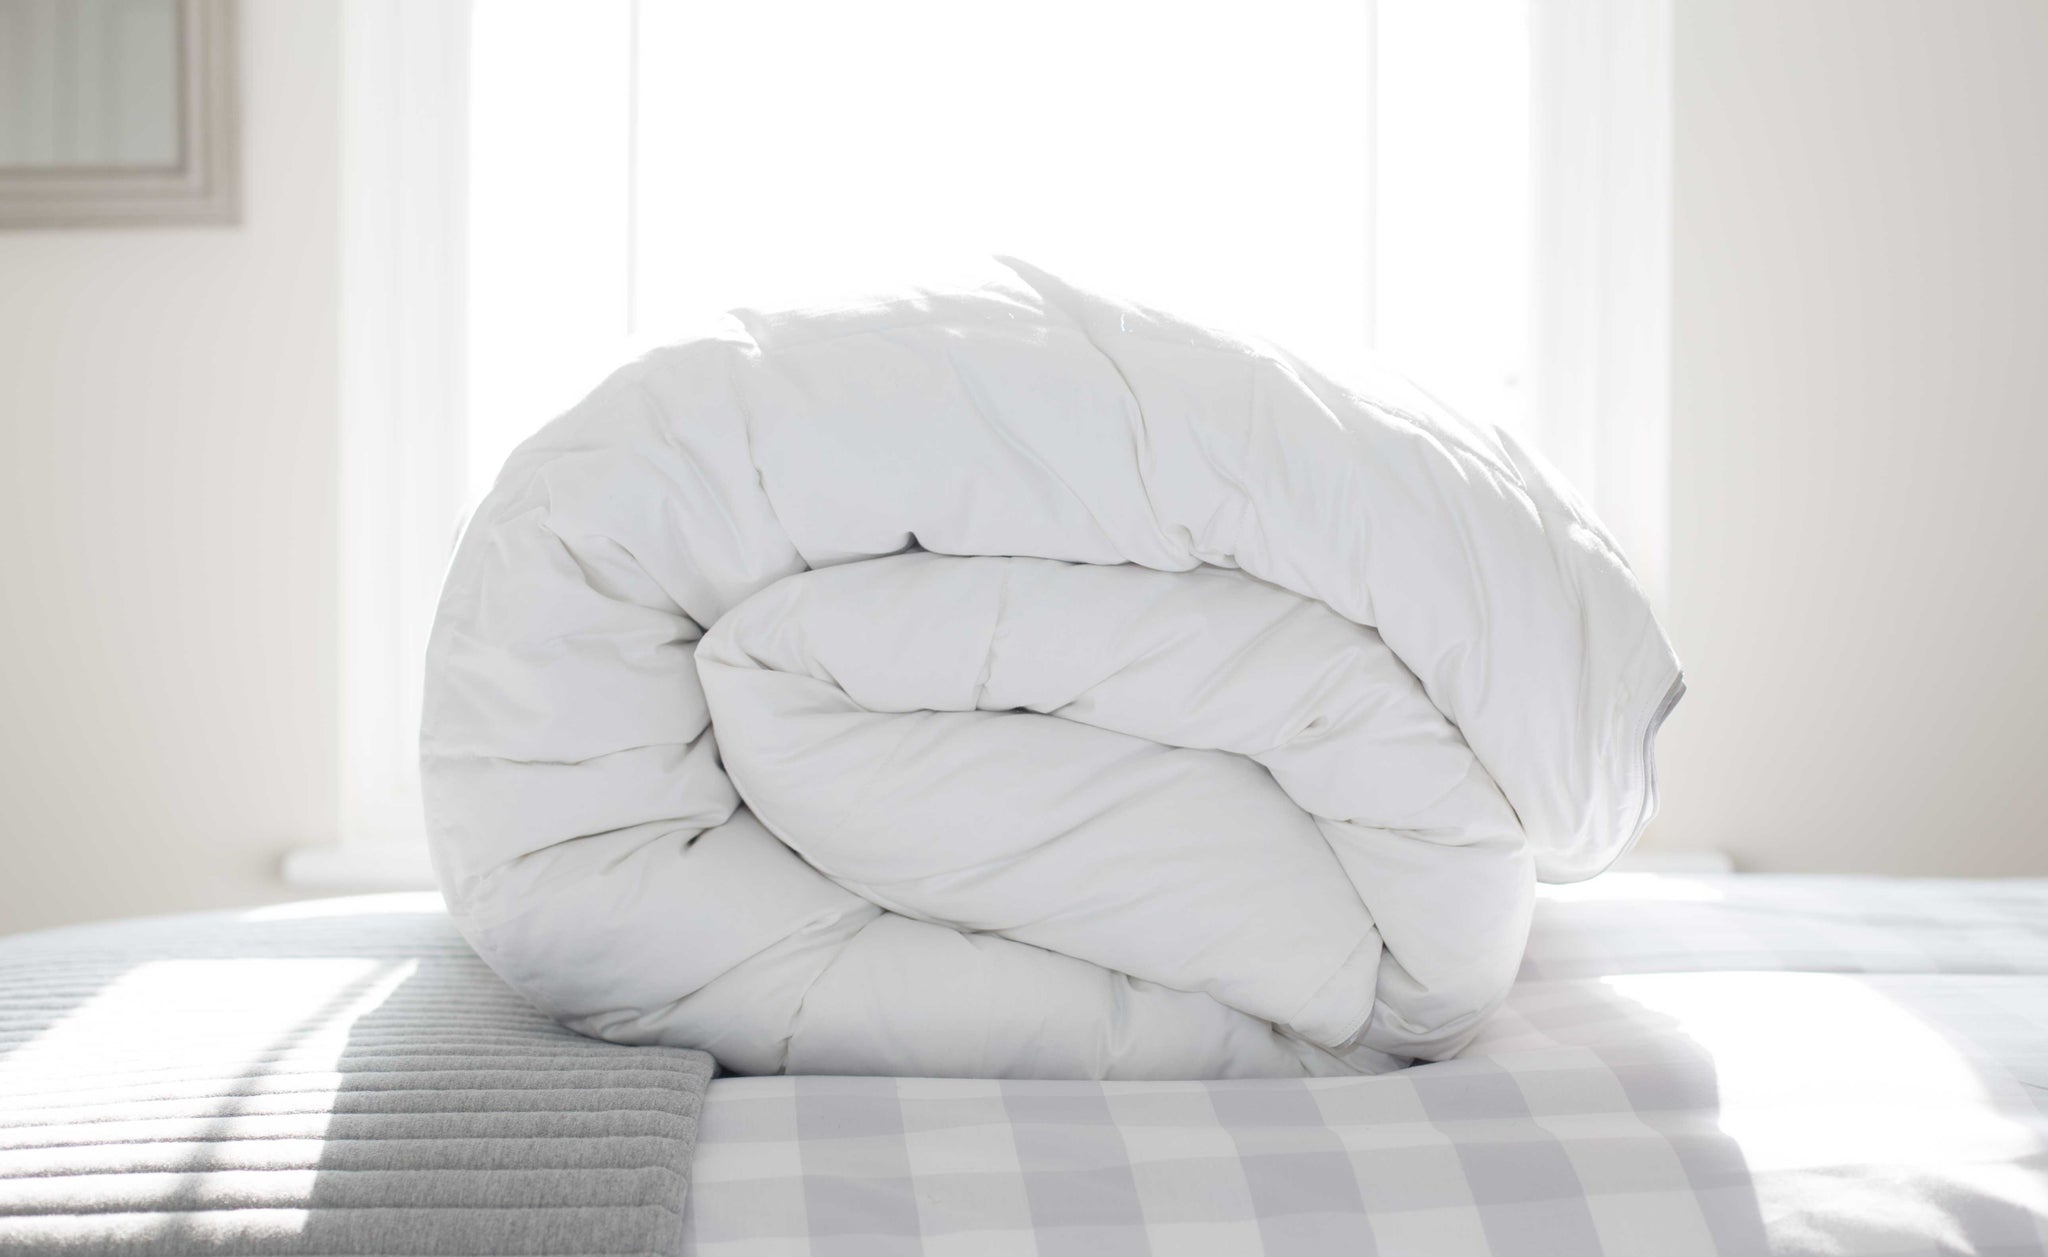 Rolled Duvet on a Check Duvet Cover in a Bedroom | scooms